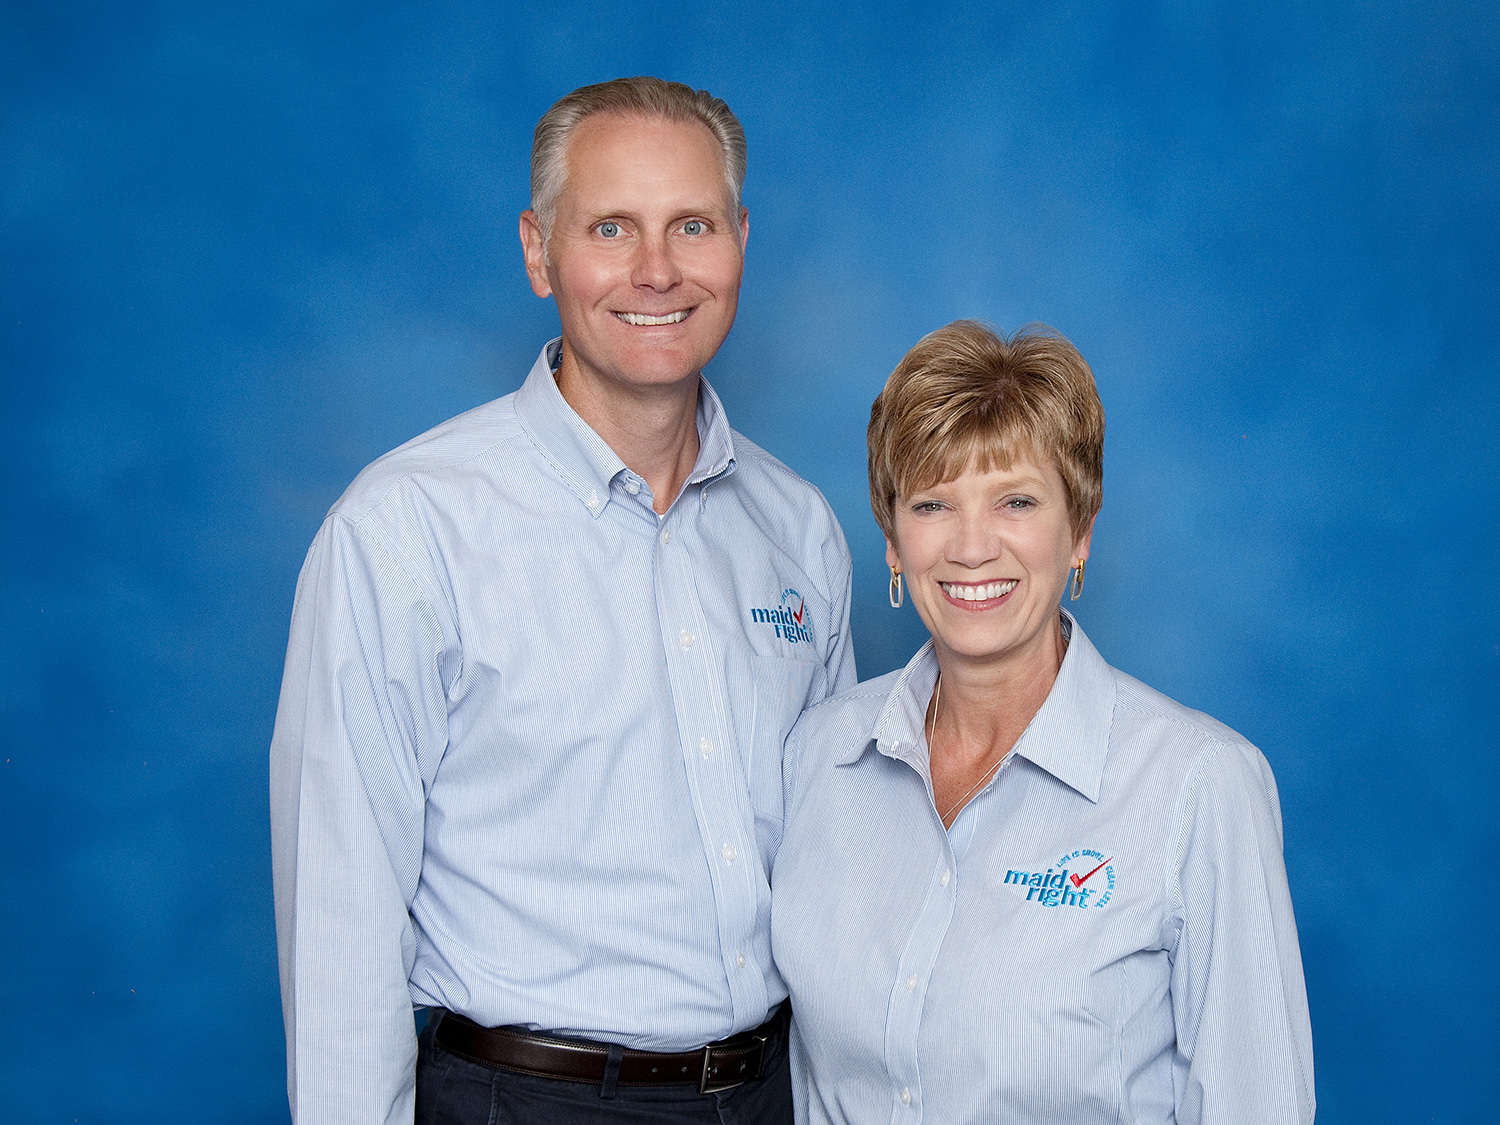 Kevin and Sue Johnson, Maid Right Master Owners, Minneapolis/St. Paul